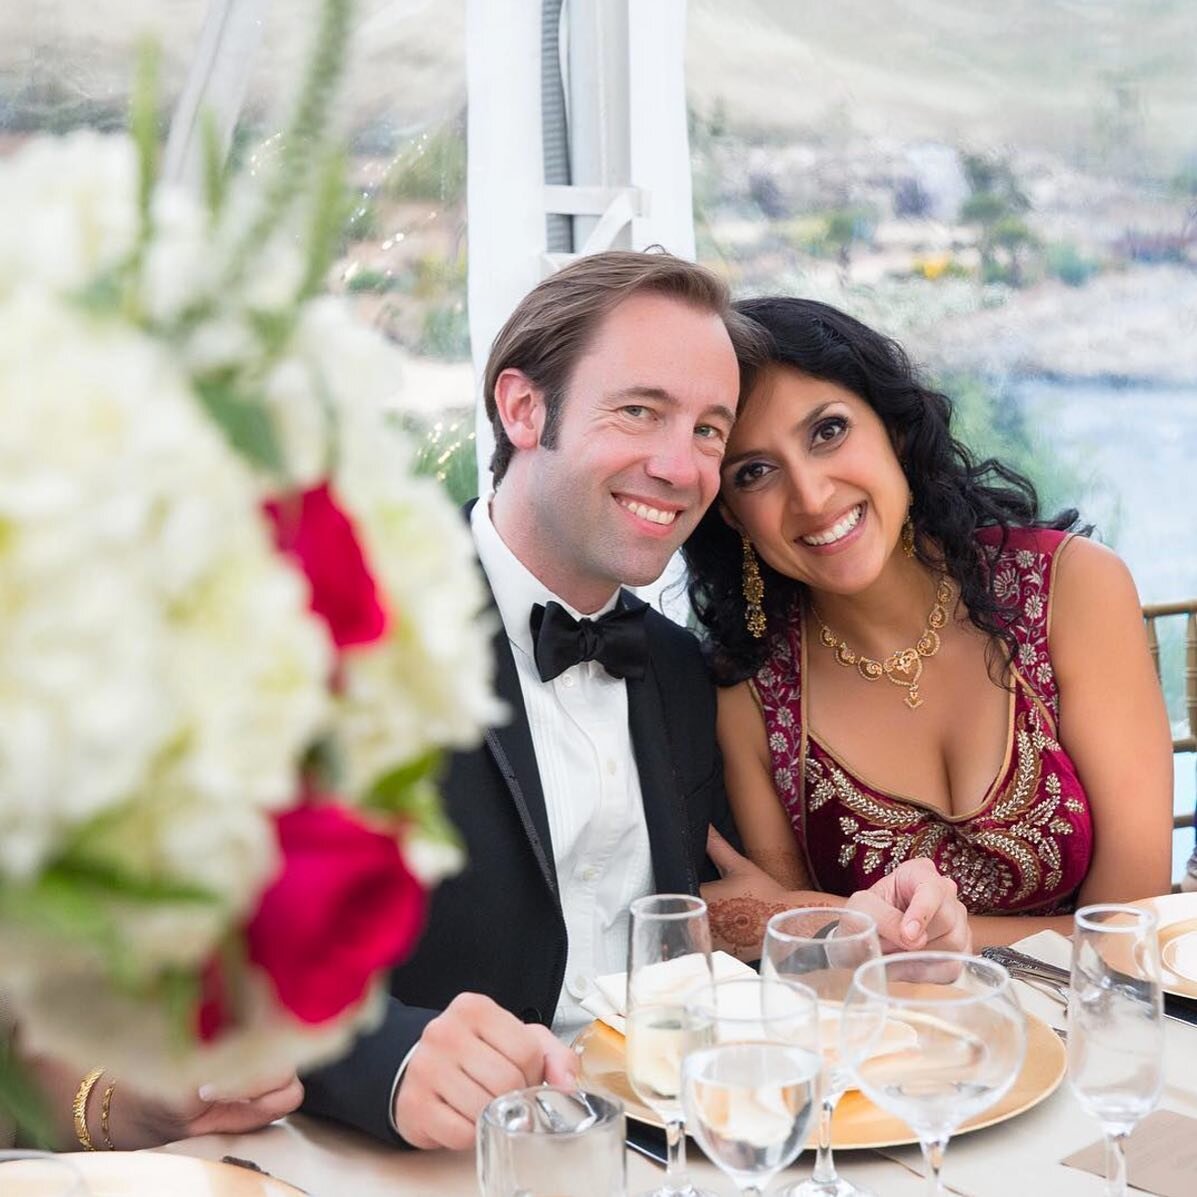 Featuring our second couple of the week: Rachna + Aaron! Here is what Rachna had to say about her experience meeting now-husband and father of their two beautiful sons:

&quot;I highly recommend Tawkify because it's much more than a dating website. I